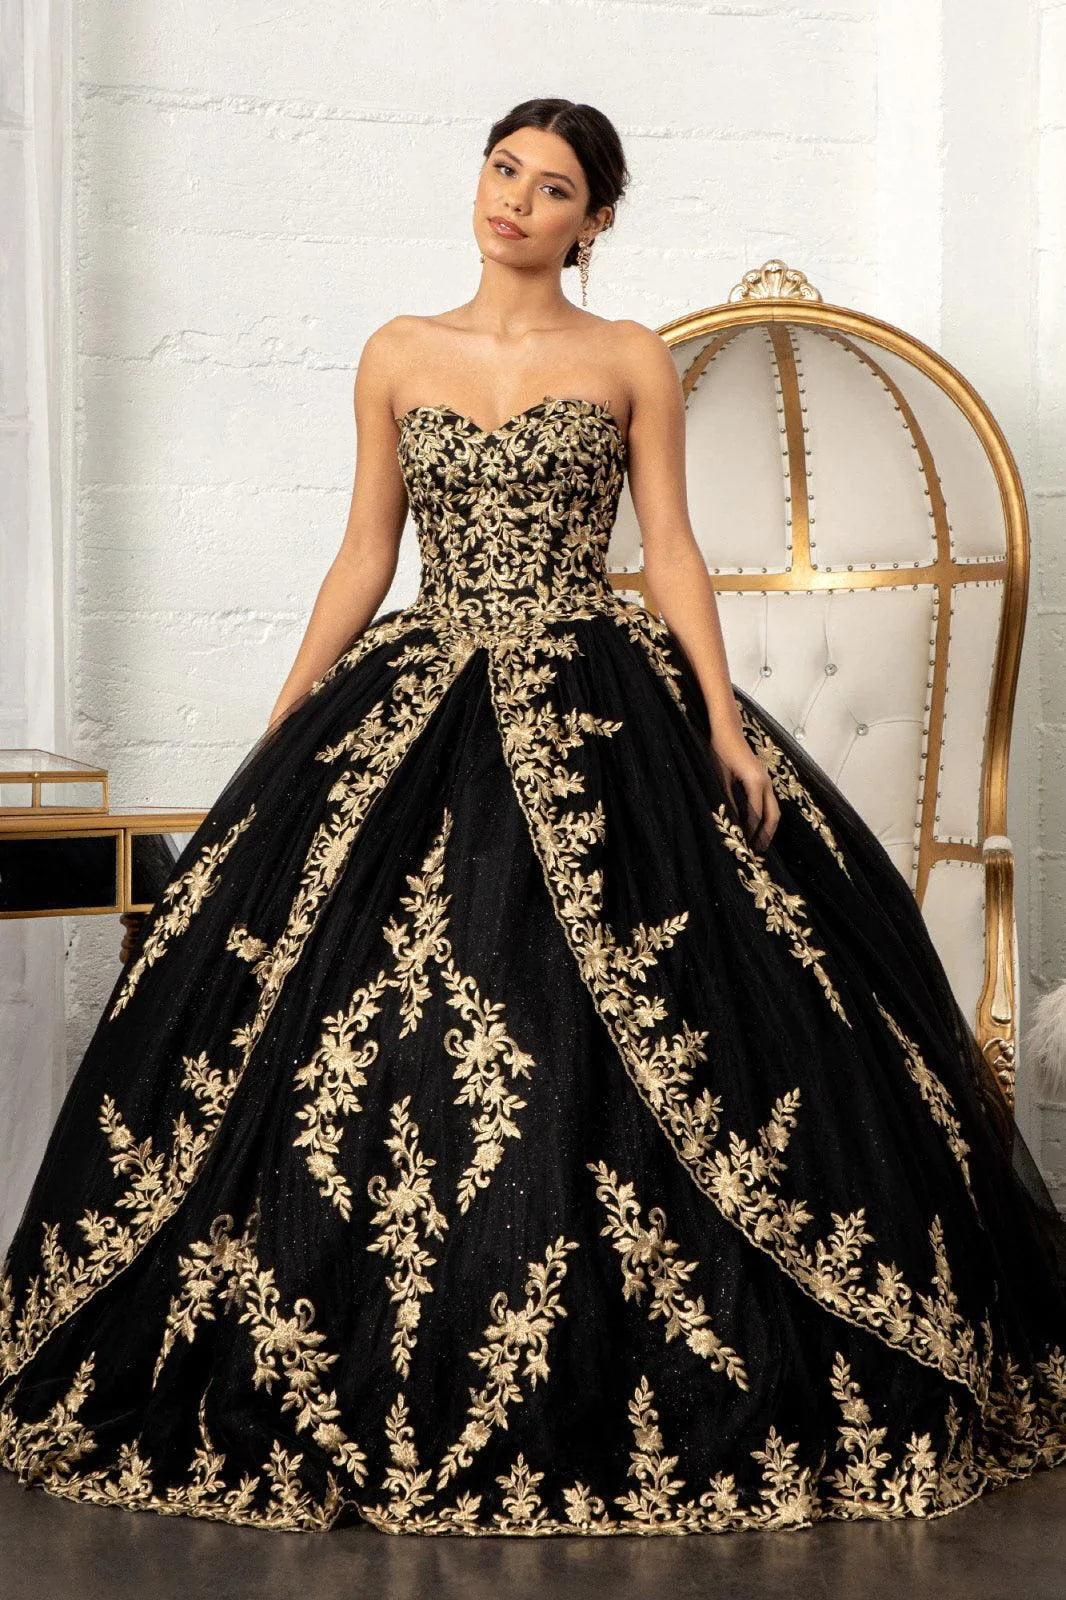 OSTTY - Strapless Black Dress Ball Gown Ruffle Party Dresses OS01006 $699.99